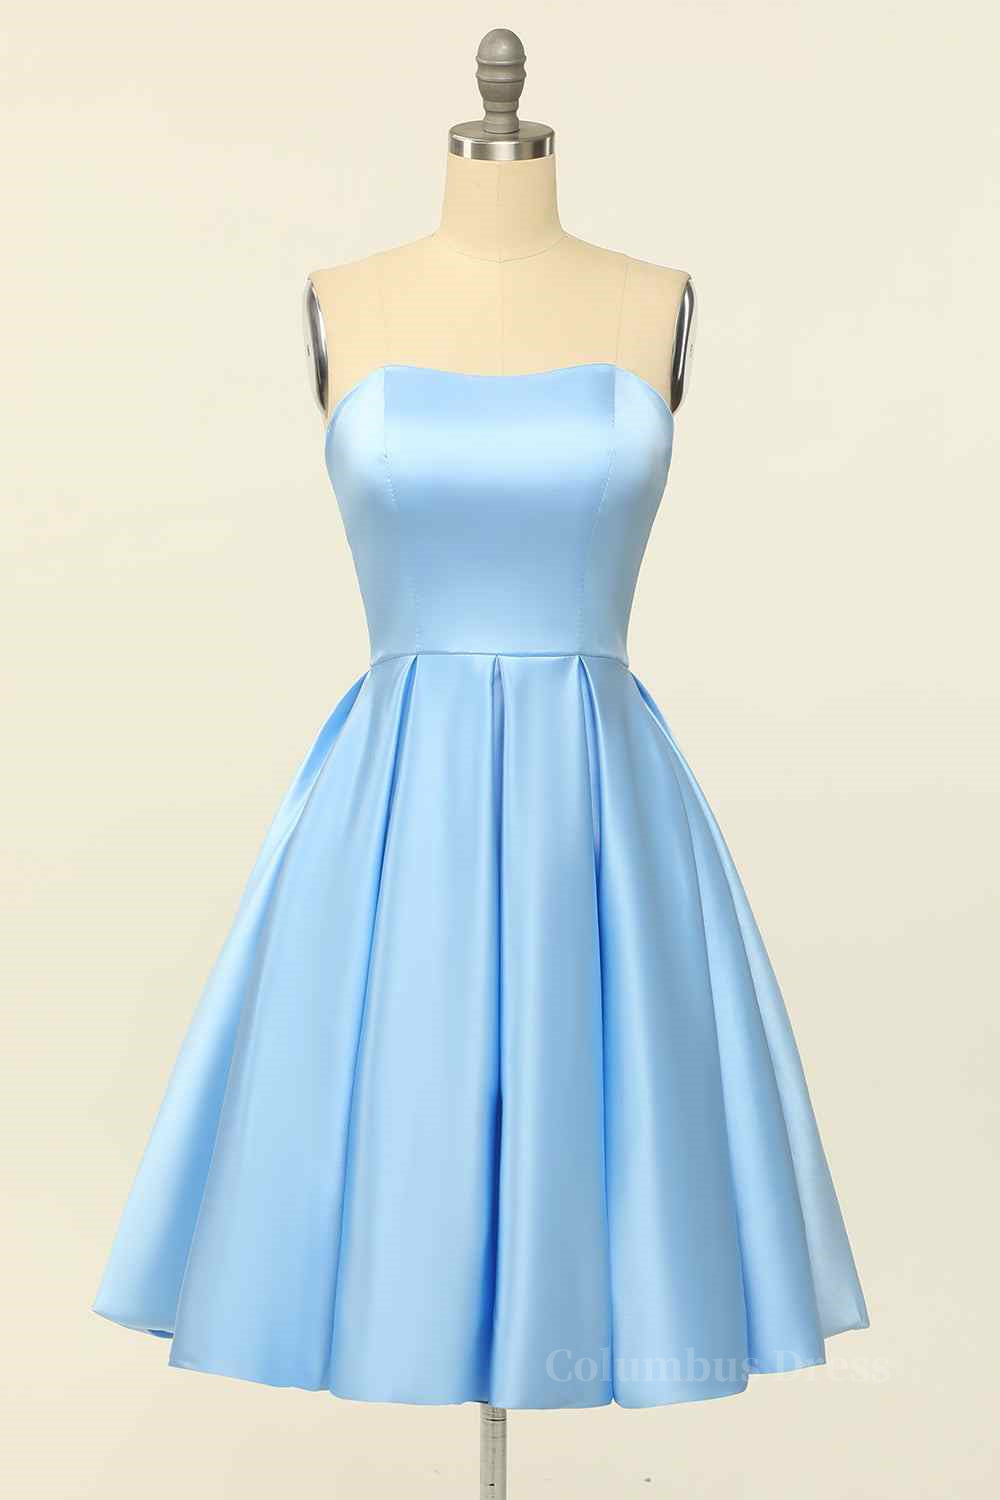 Party Dress Over 52, Blue A-line Strapless Satin Mini Homecoming Dress